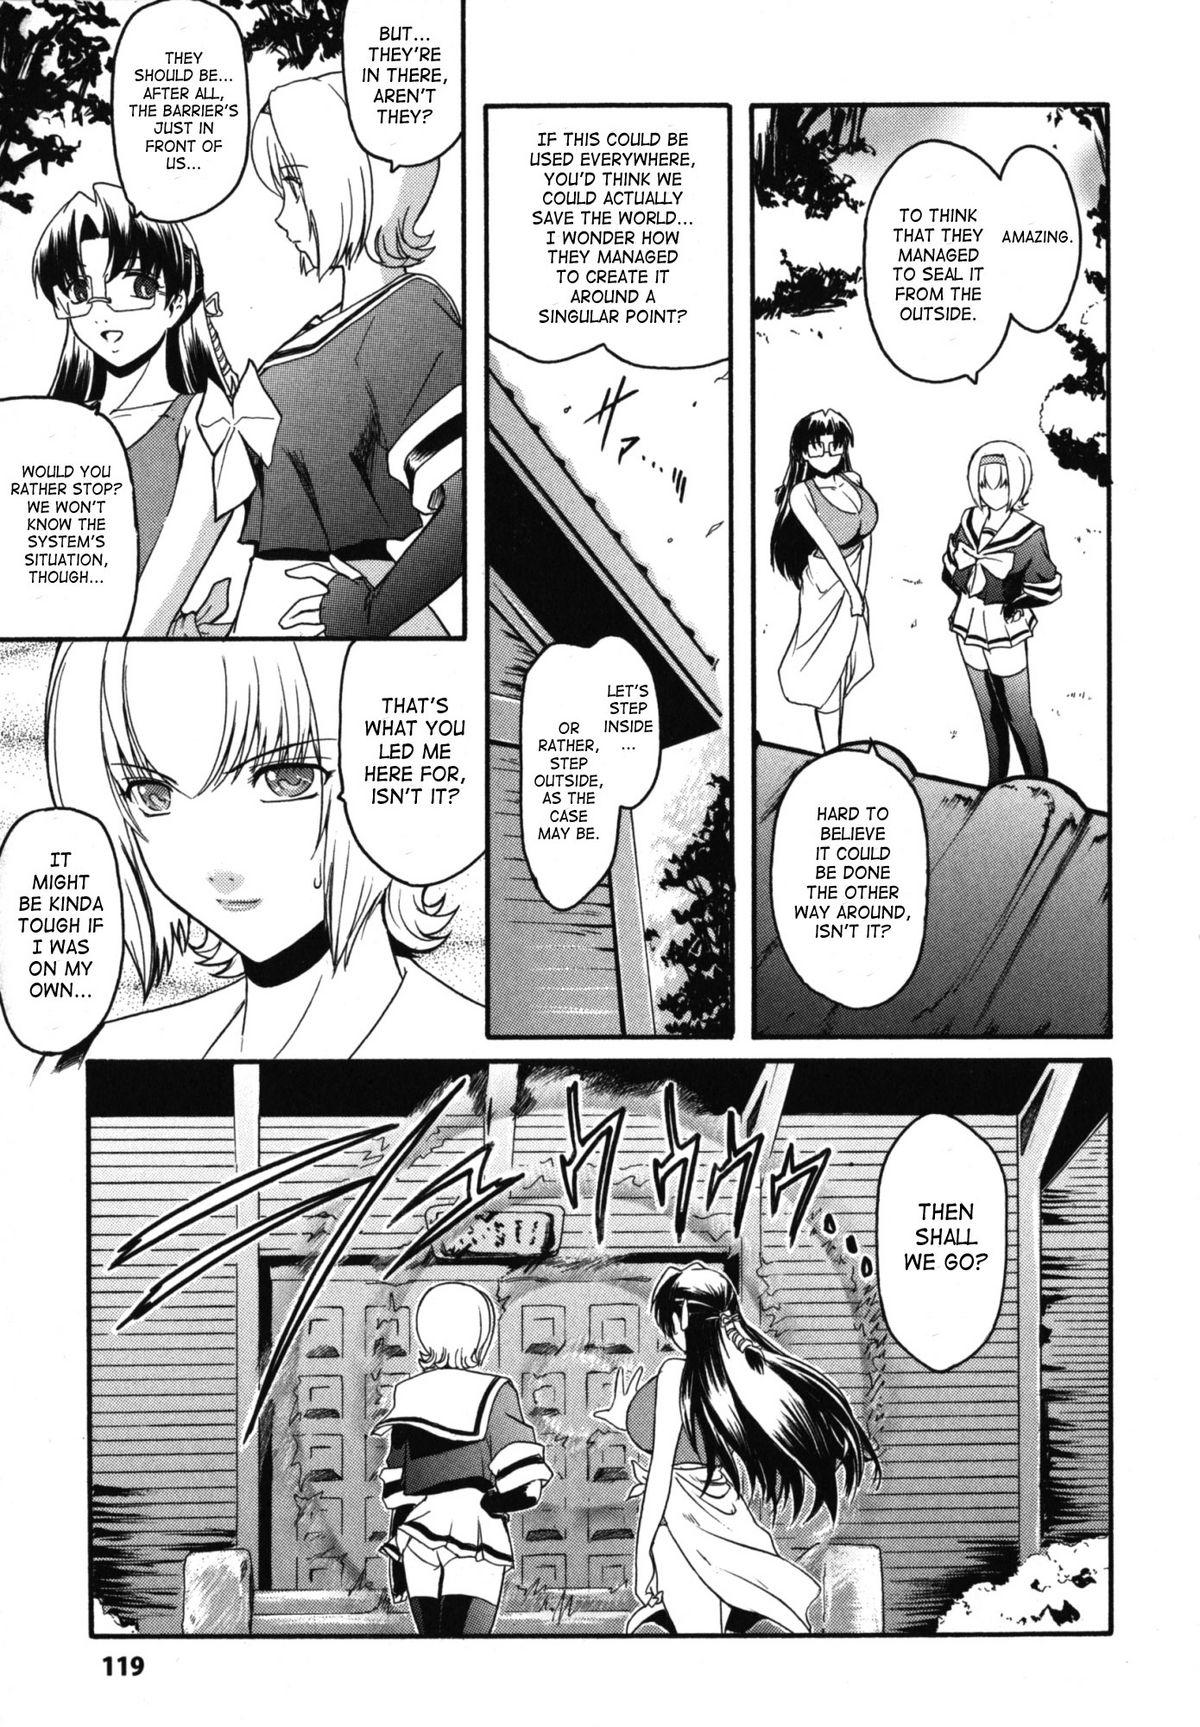 Kabe no Naka no Tenshi Jou | The Angel Within The Barrier Vol. 1 119